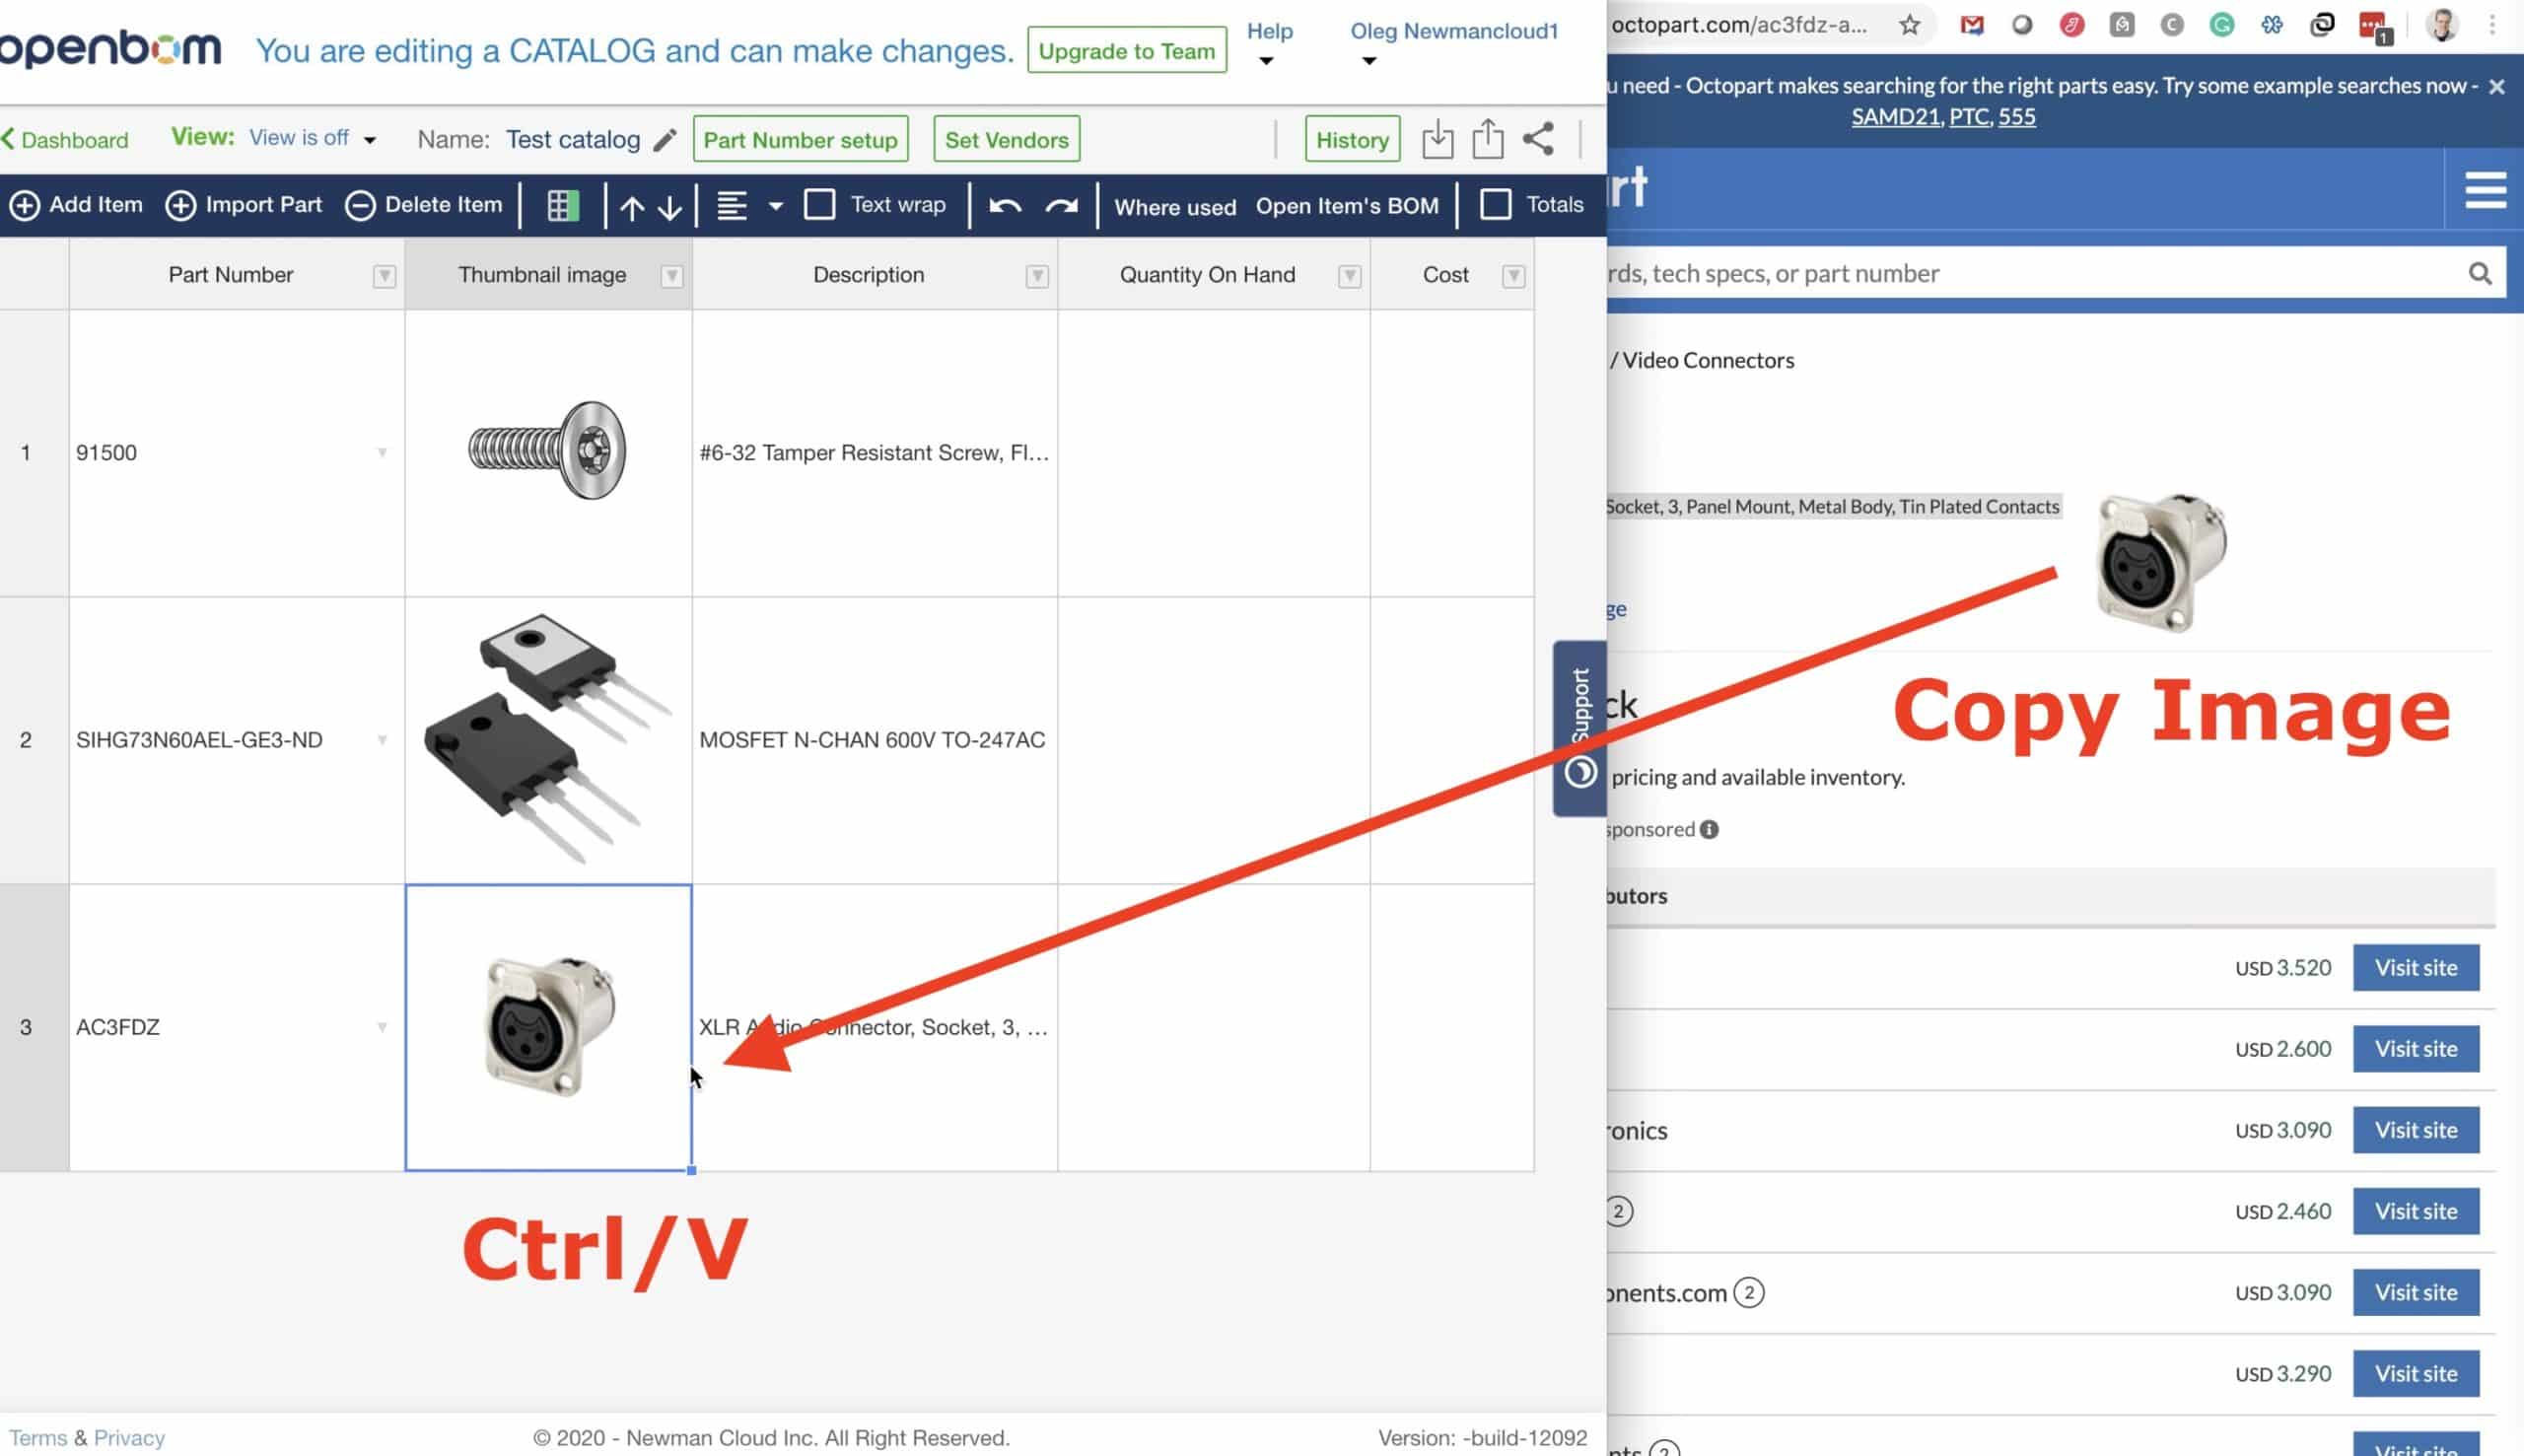 NEW: Copy / Paste Images from multiple sources in OpenBOM